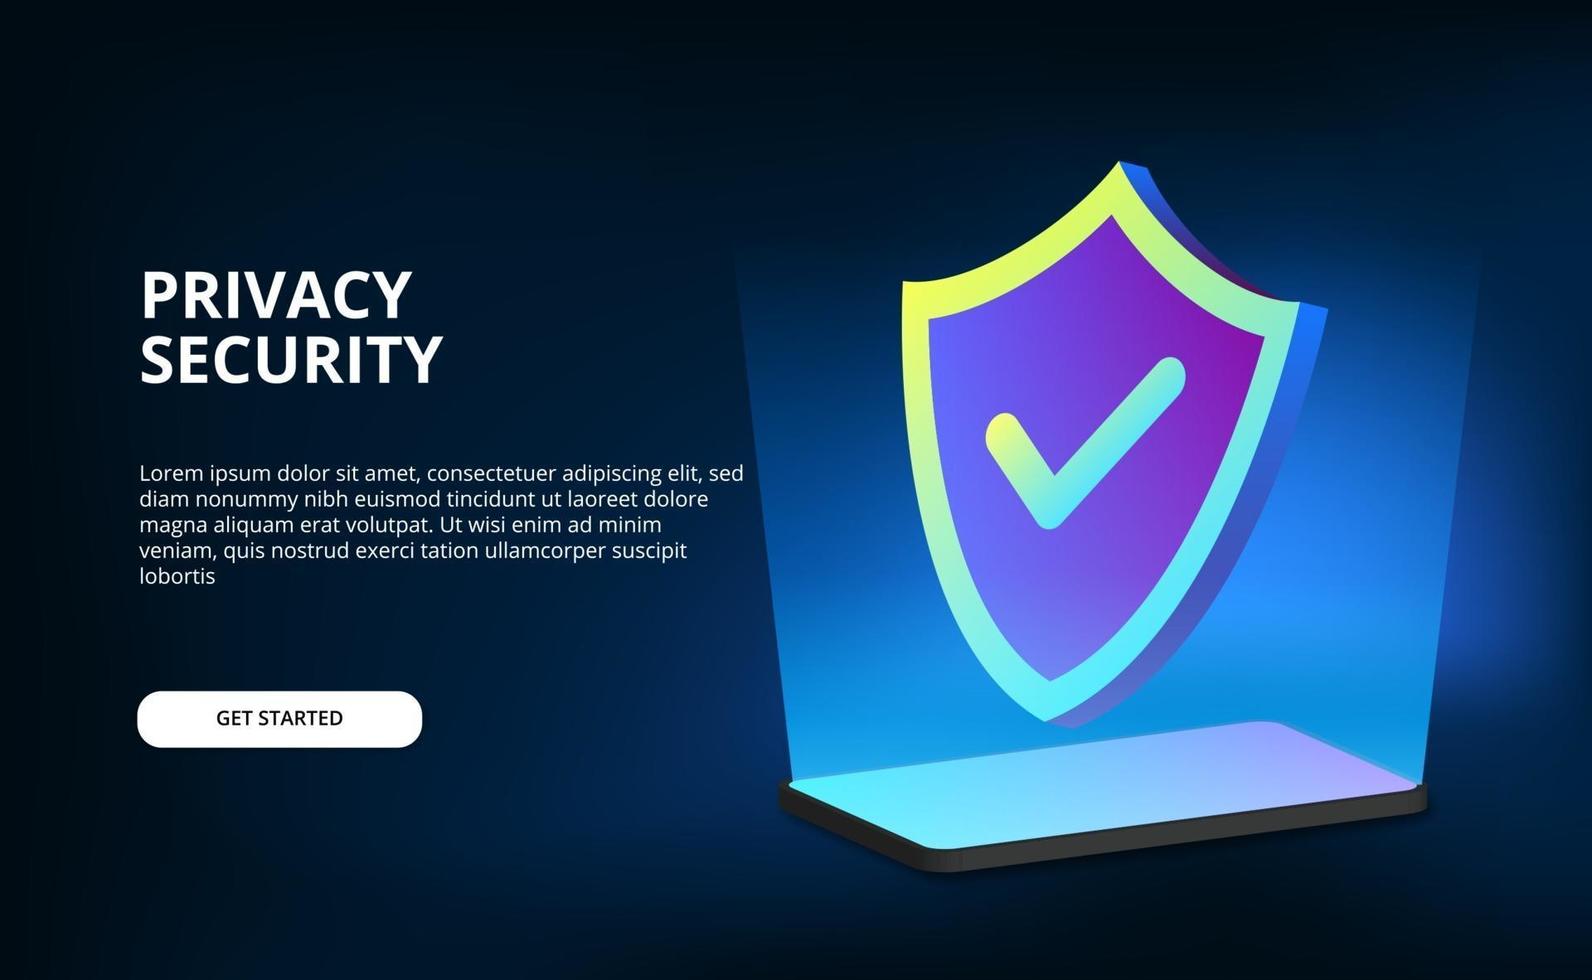 3d shield security privacy protection for phone computer internet technology cyber with dark background vector